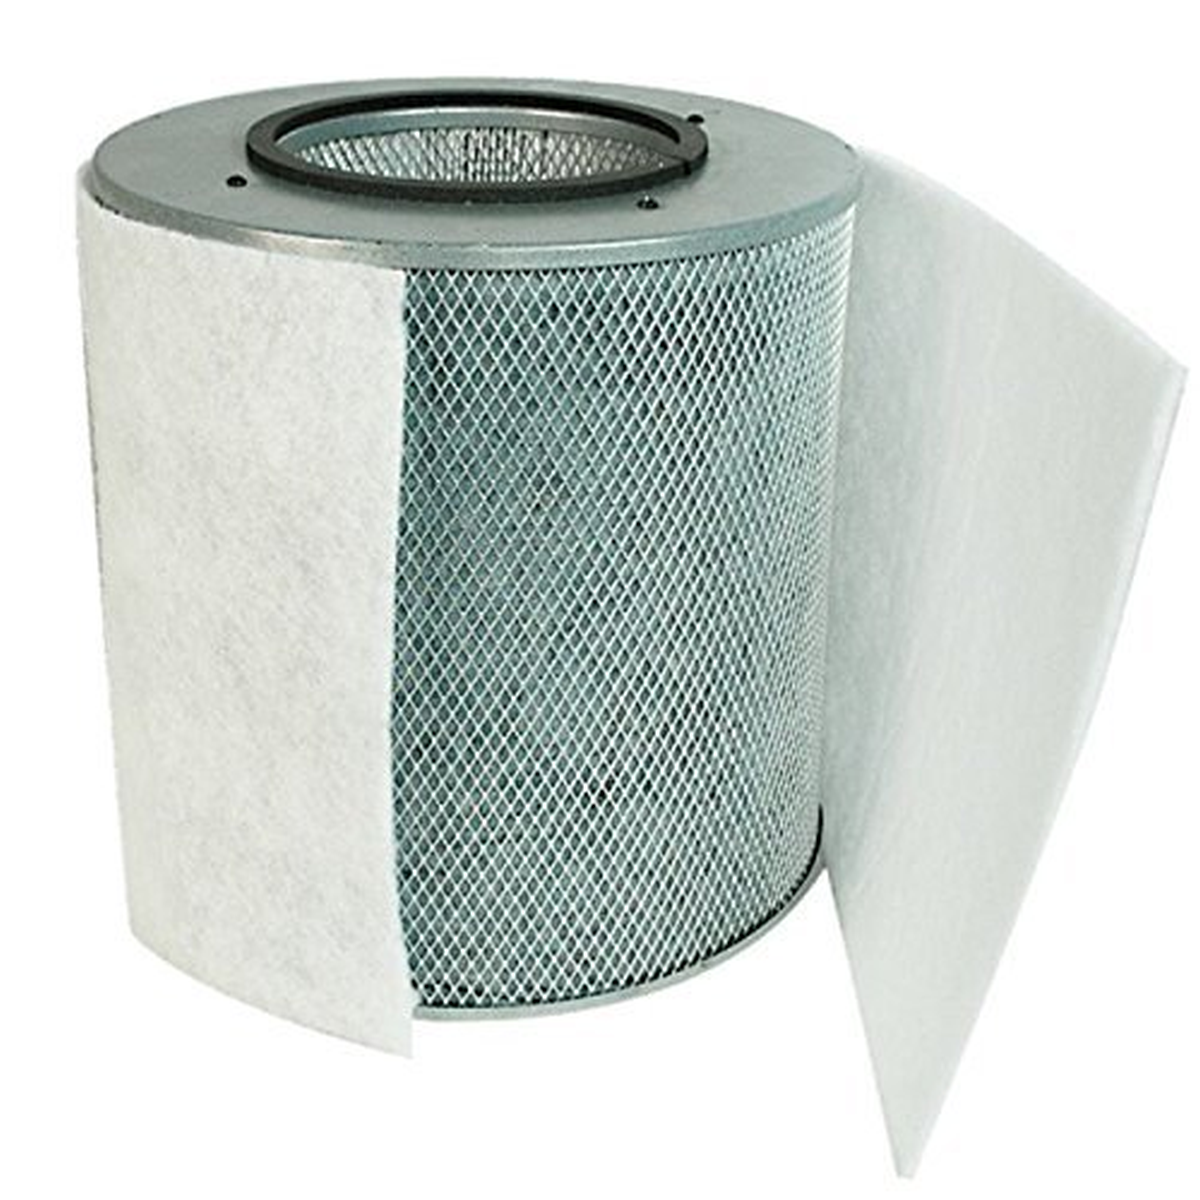 Austin Air FR402B Bedroom Machine Replacement Filter, White